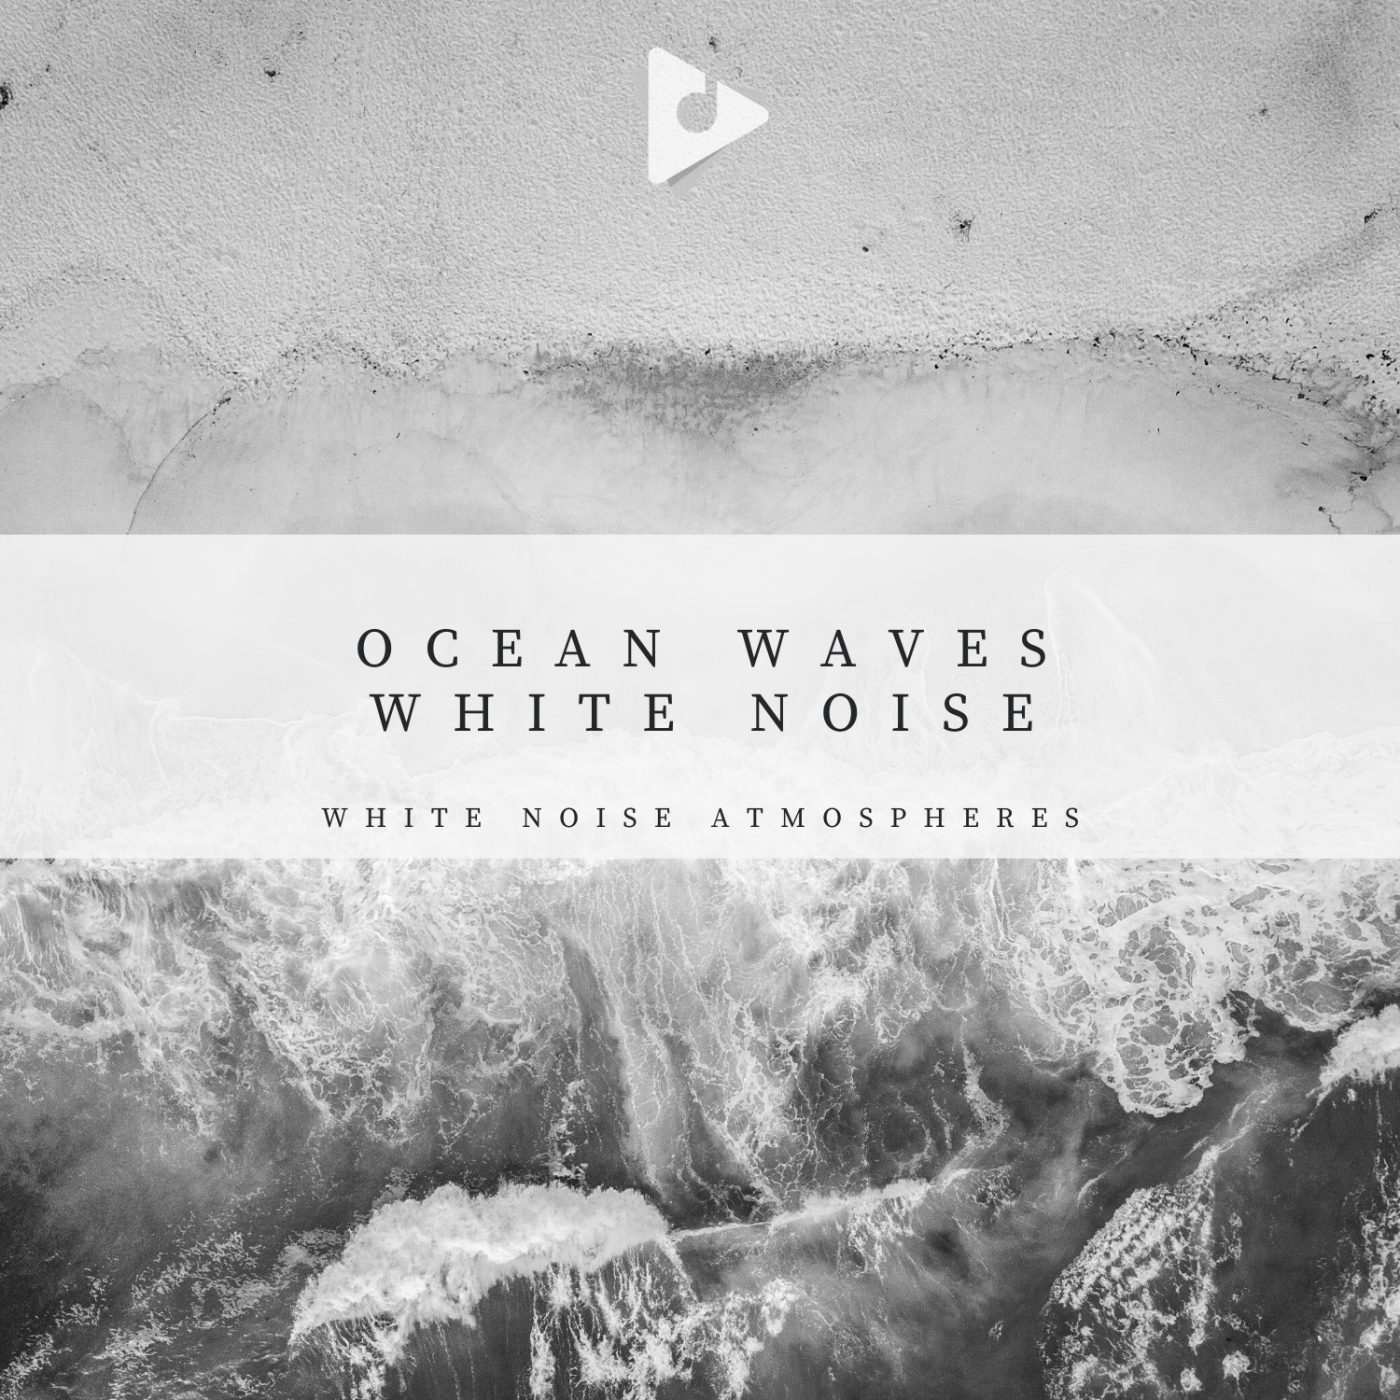 stormy ocean waves white noise